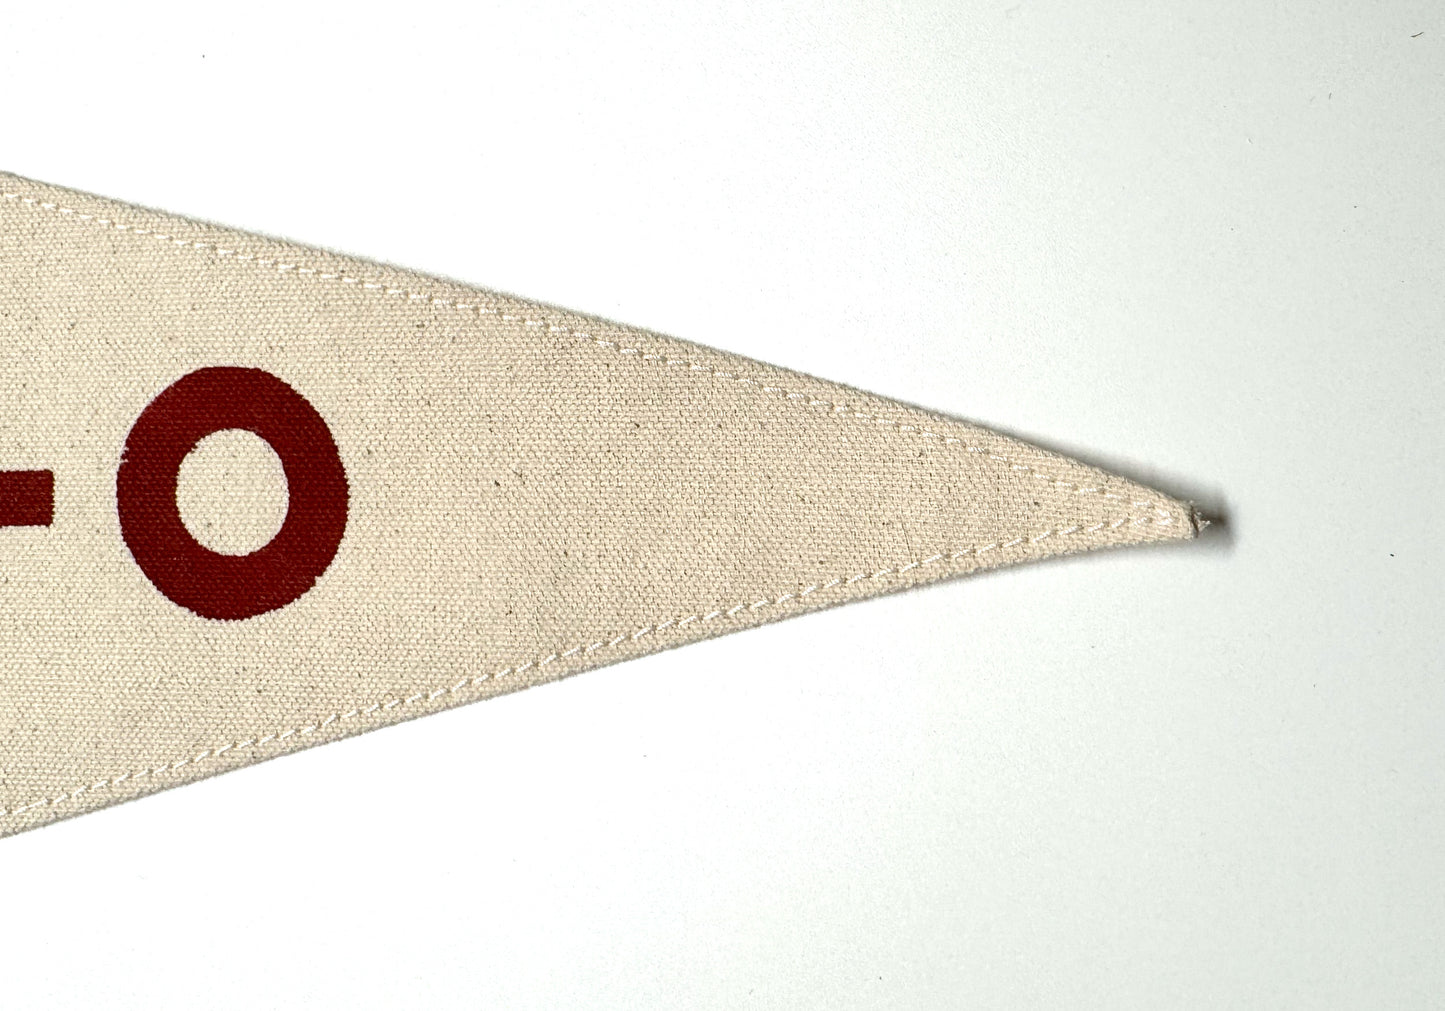 Ohio State Vintage-Inspired Pennant